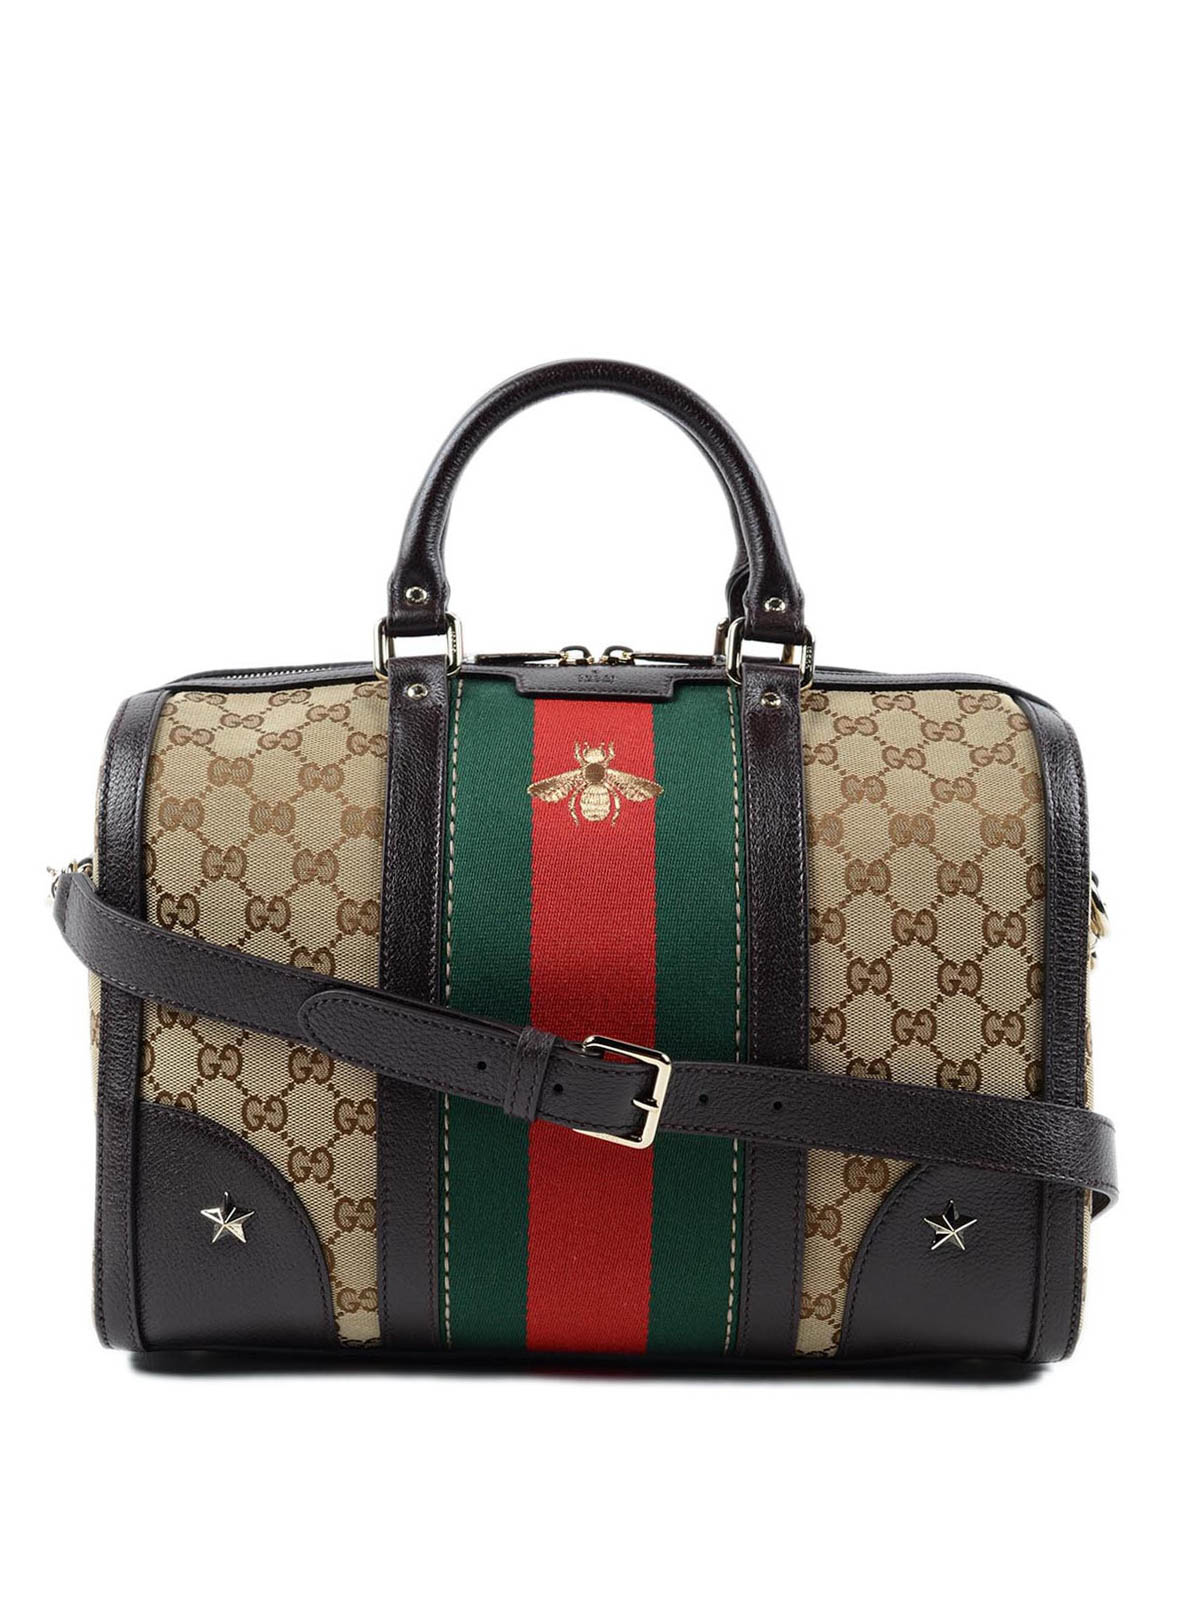 Gucci - Vintage Web embroidered bag - Luggage & Travel bags - 406868 KQWZG 8869